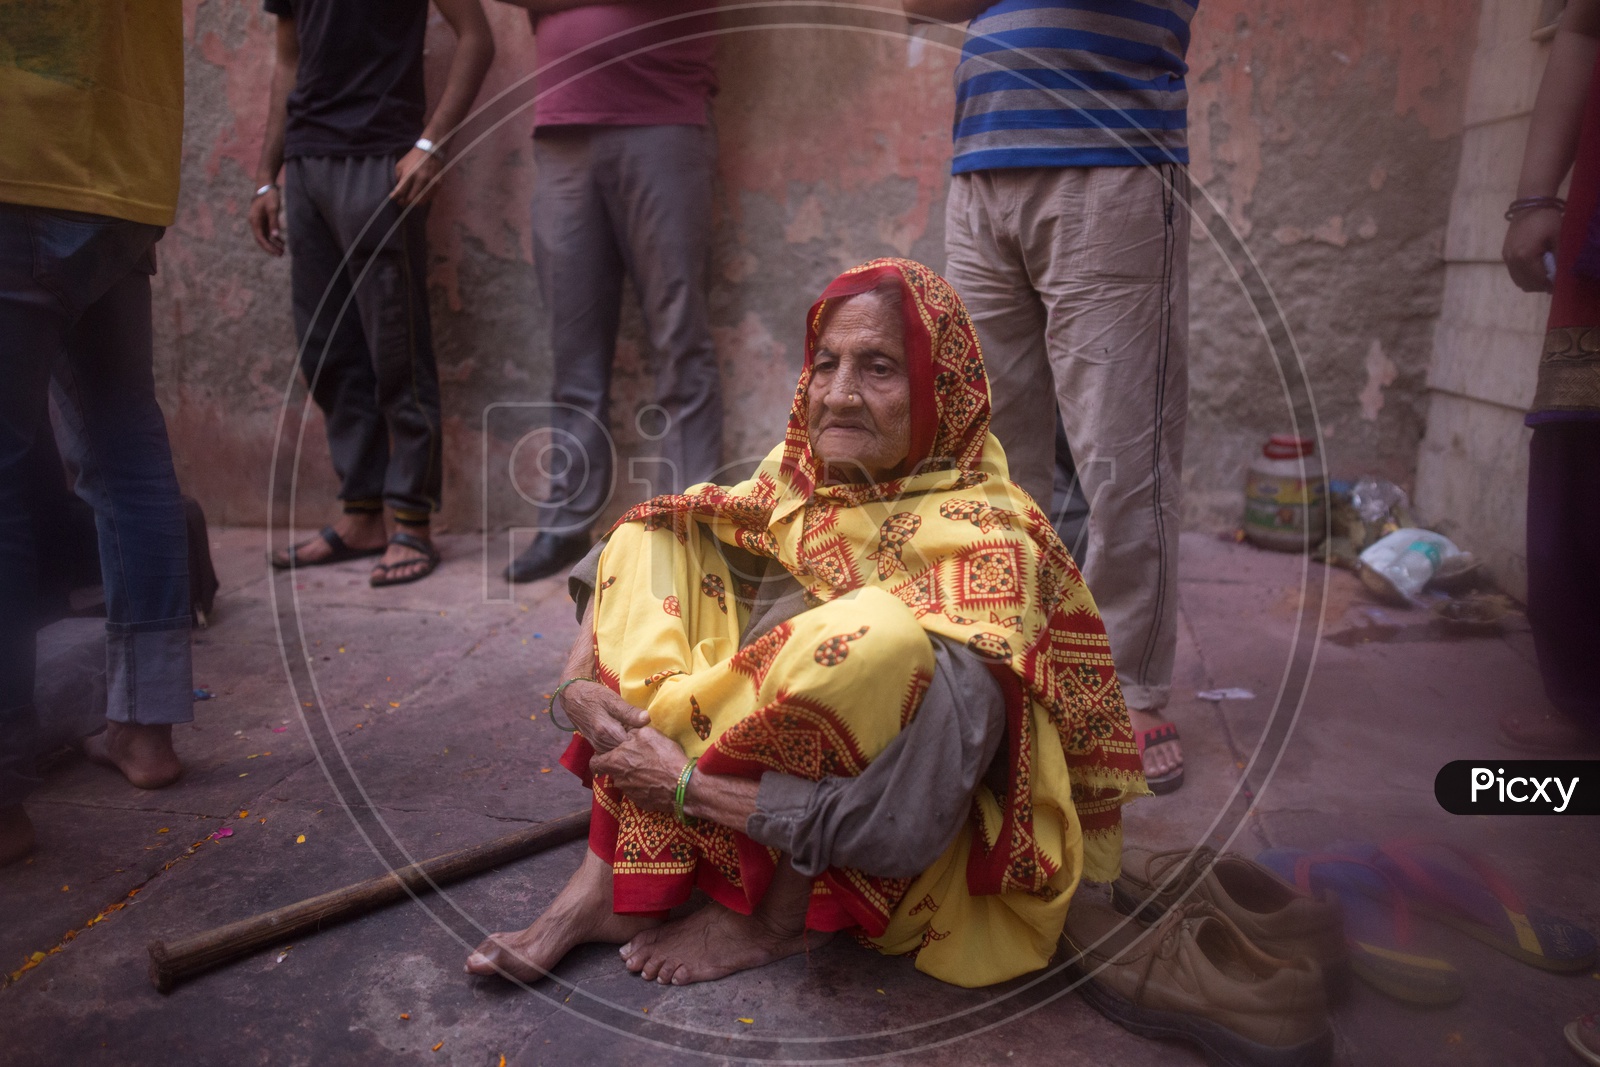 An old Indian woman sitting on the floor